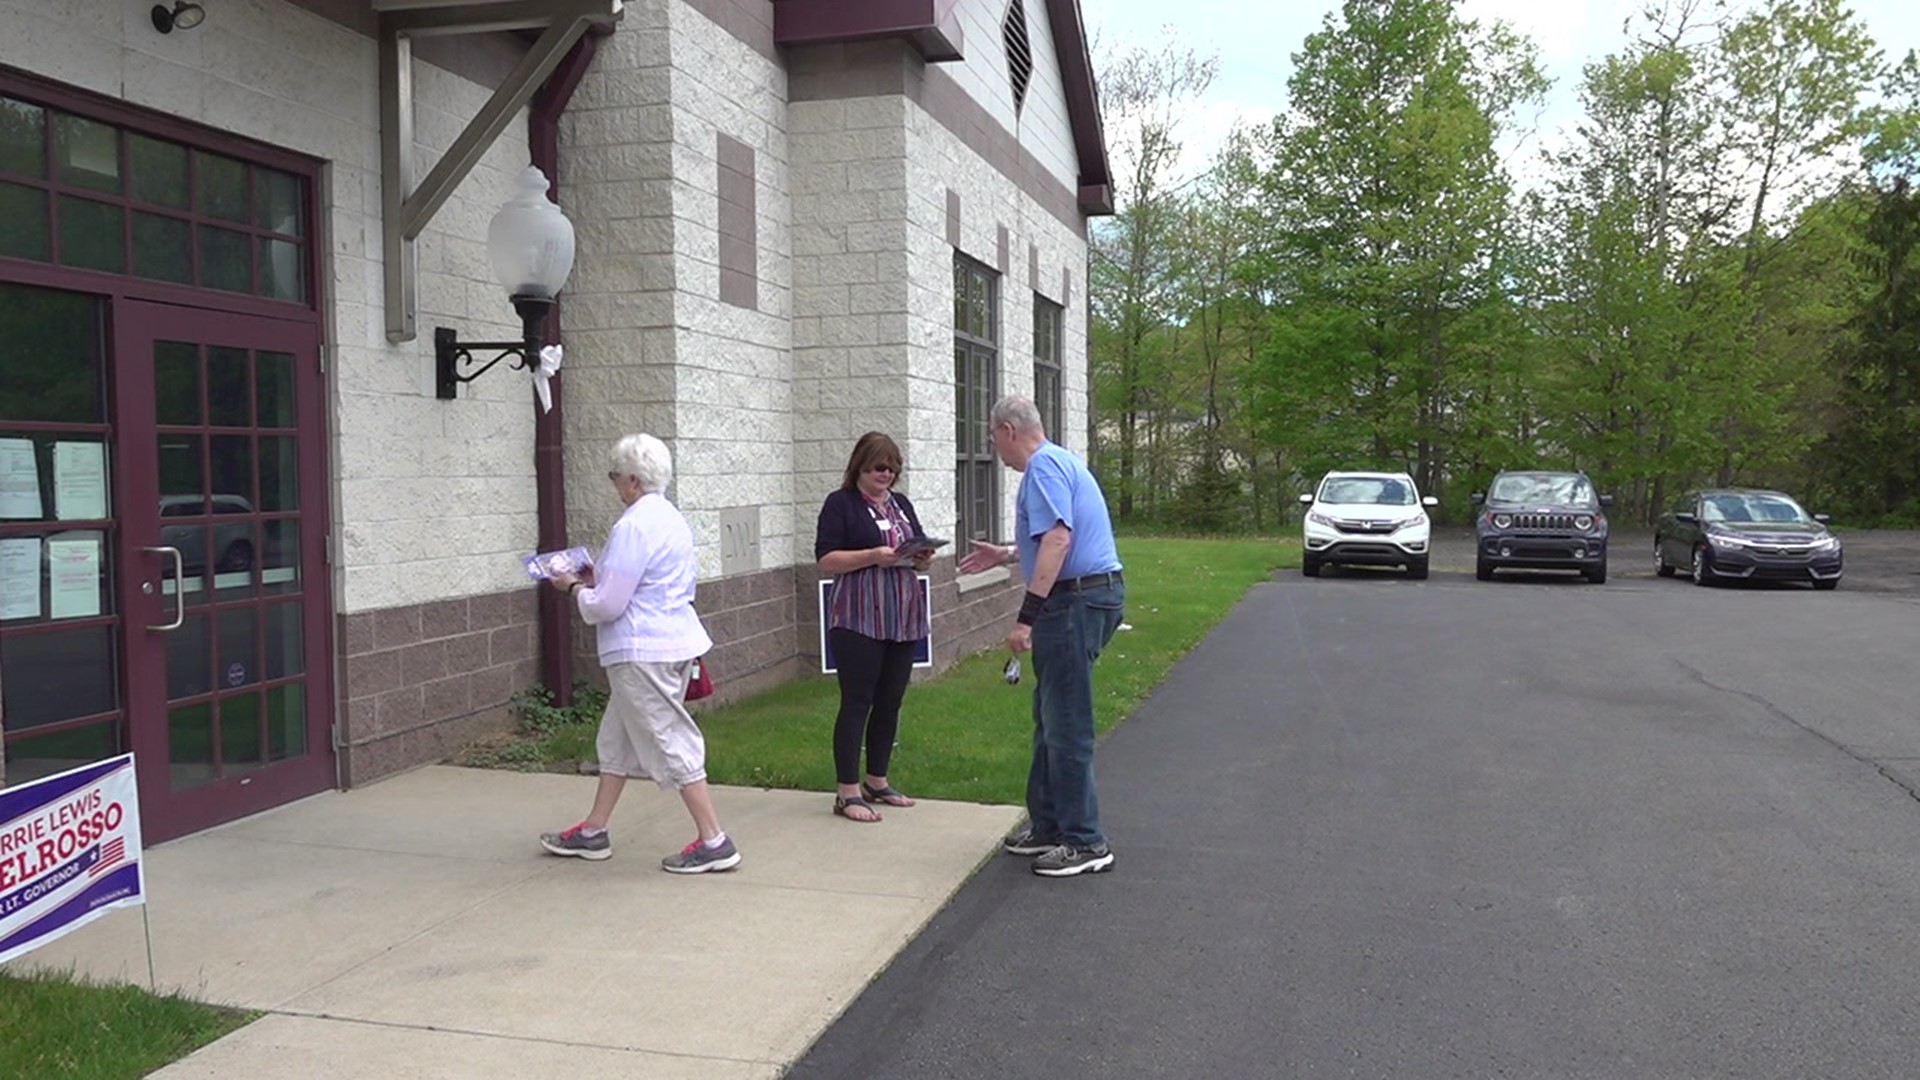 Newswatch 16's Emily Kress visited some polling locations in Lackawanna County and found voters eager to cast their ballots.